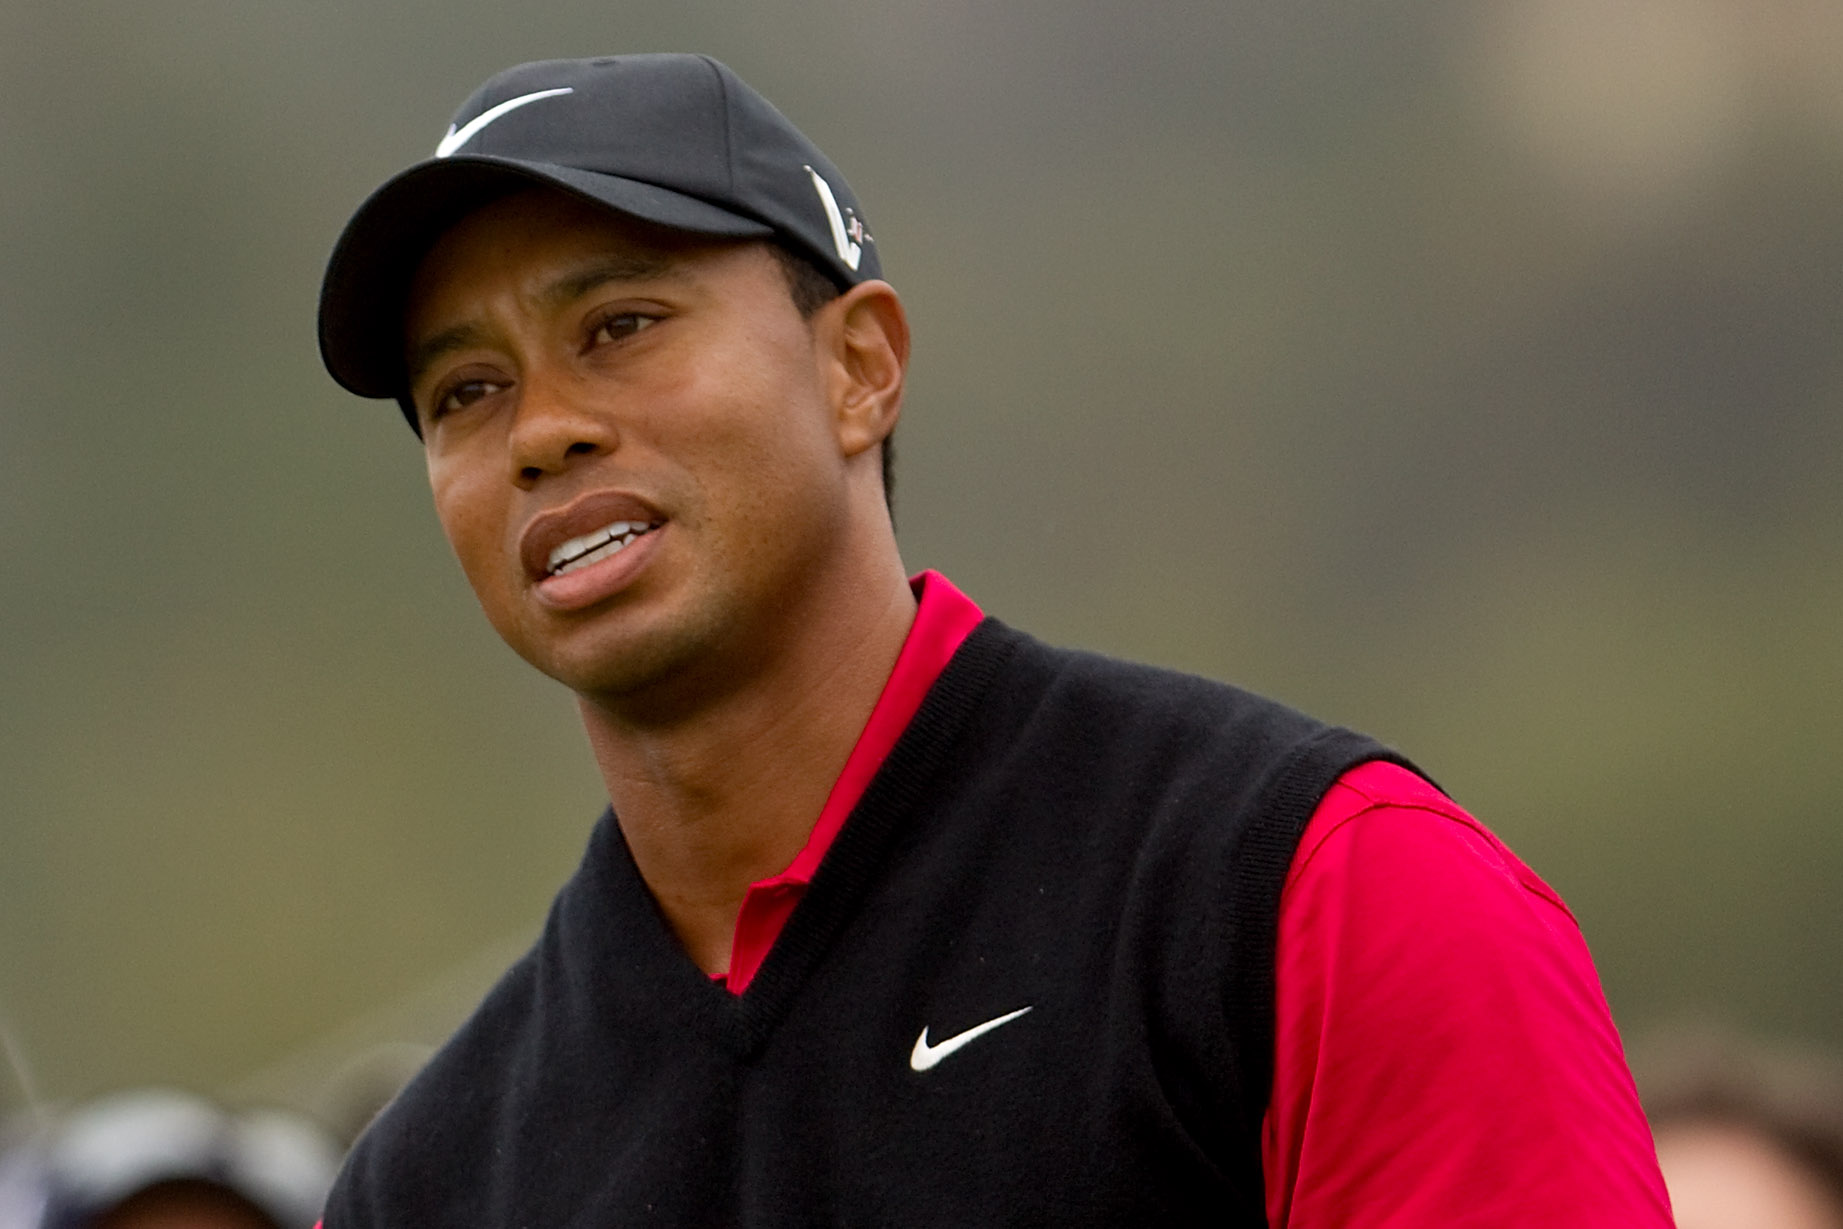 Tiger Woods won't play the Masters